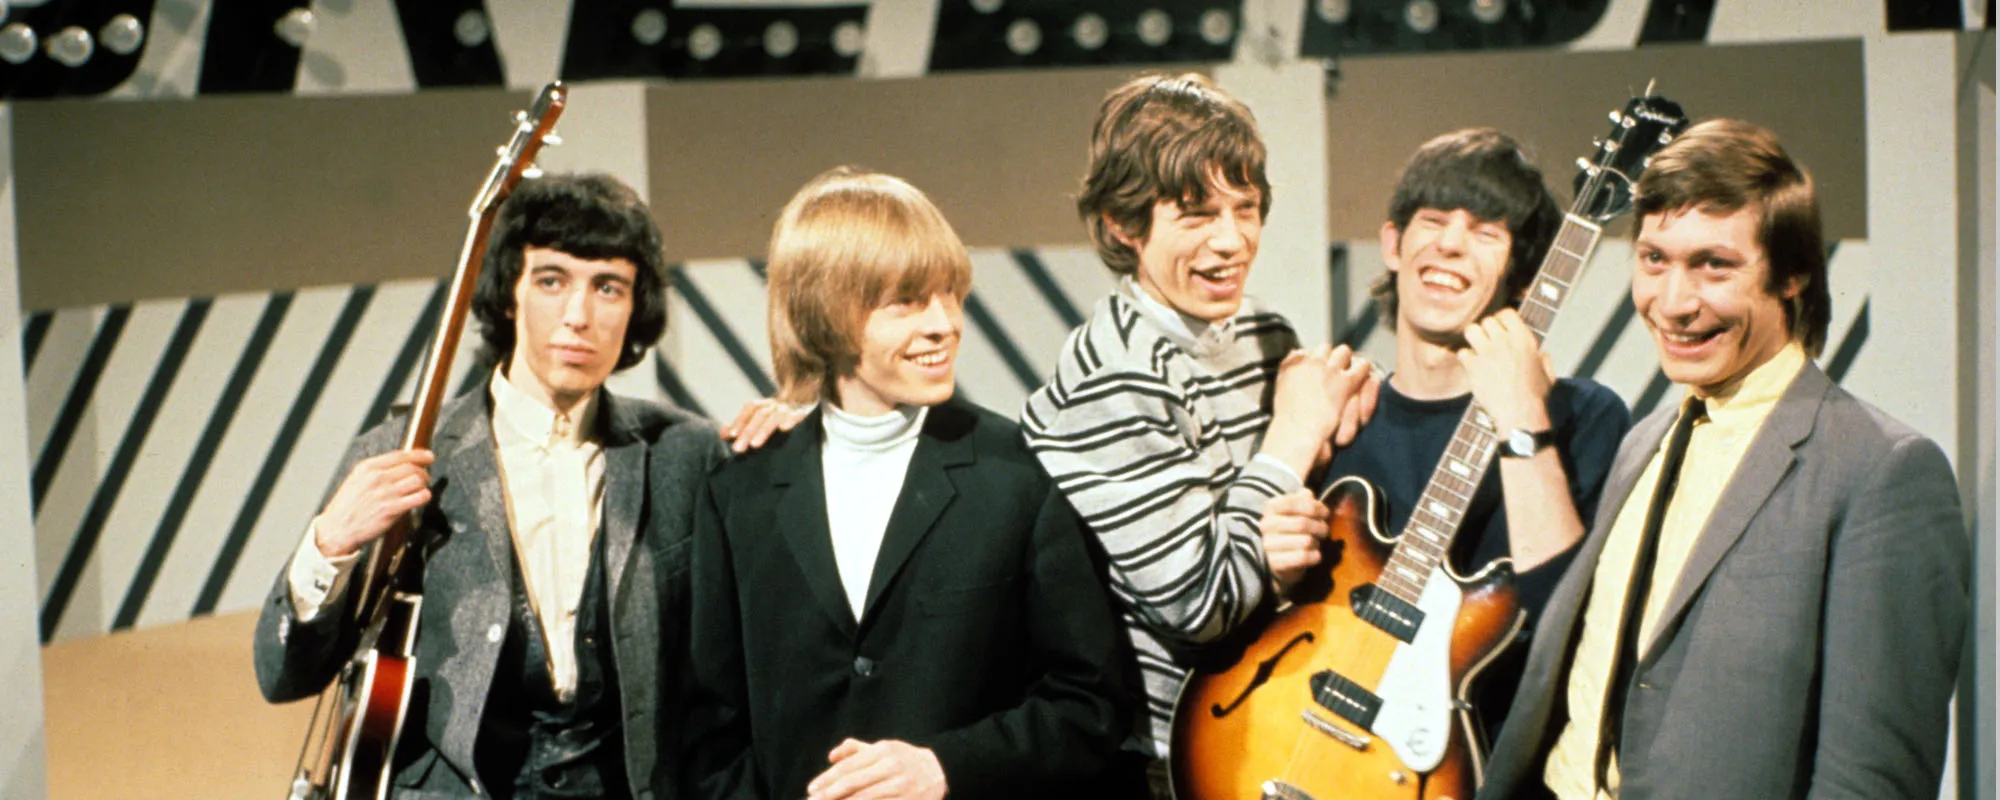 The Meaning Behind the Band Name: The Rolling Stones